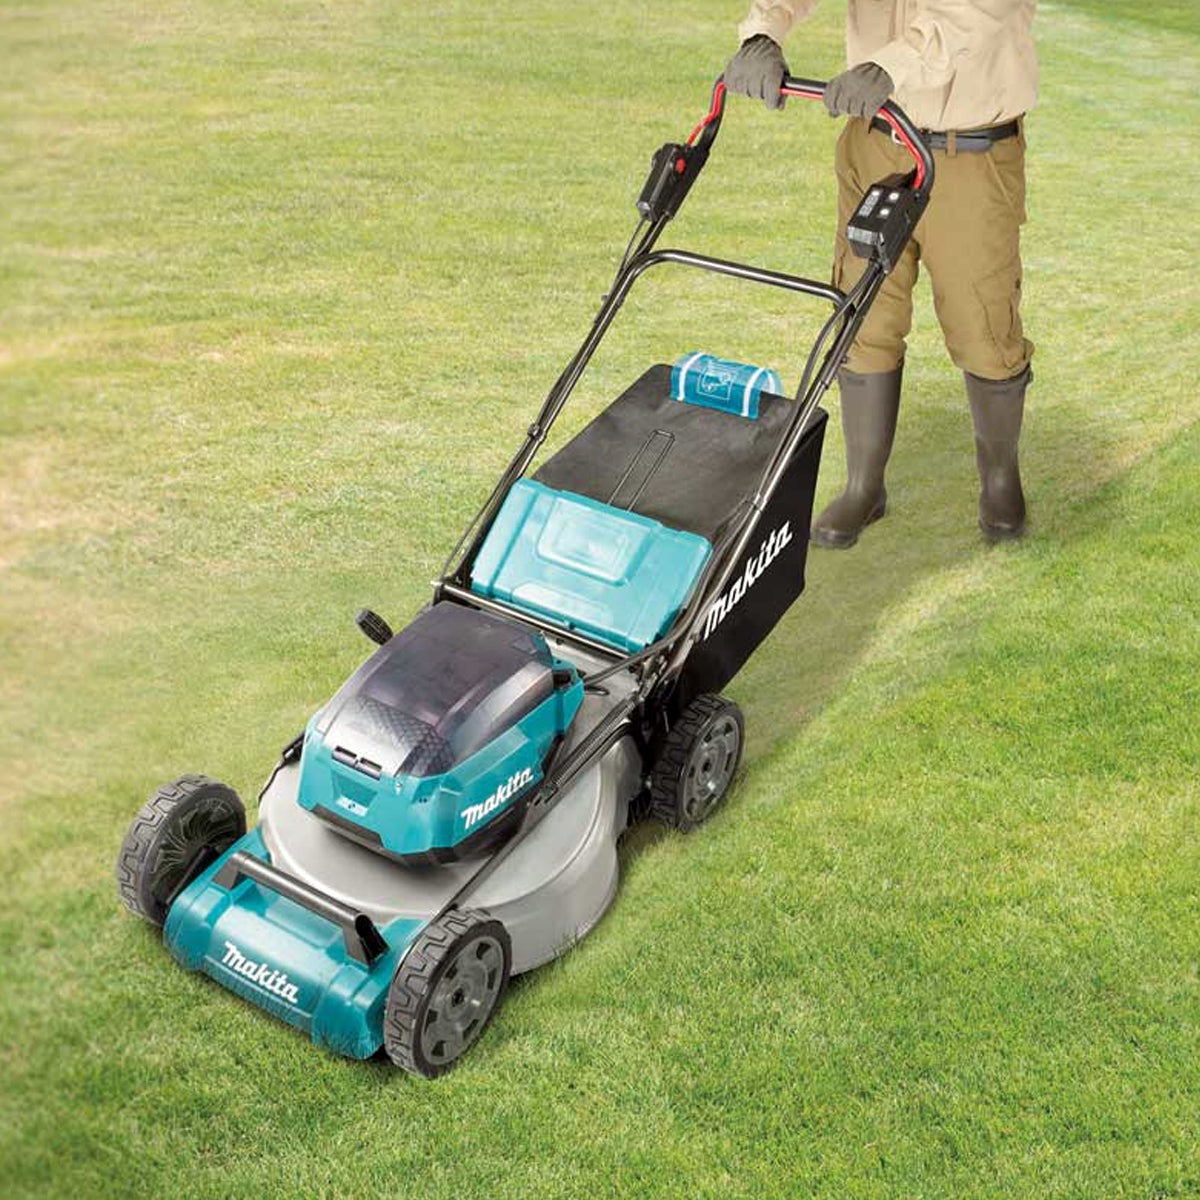 Makita DLM530PG2 36V Brushless Lawn Mower 534mm with 2 x 6.0Ah Batteries & Charger